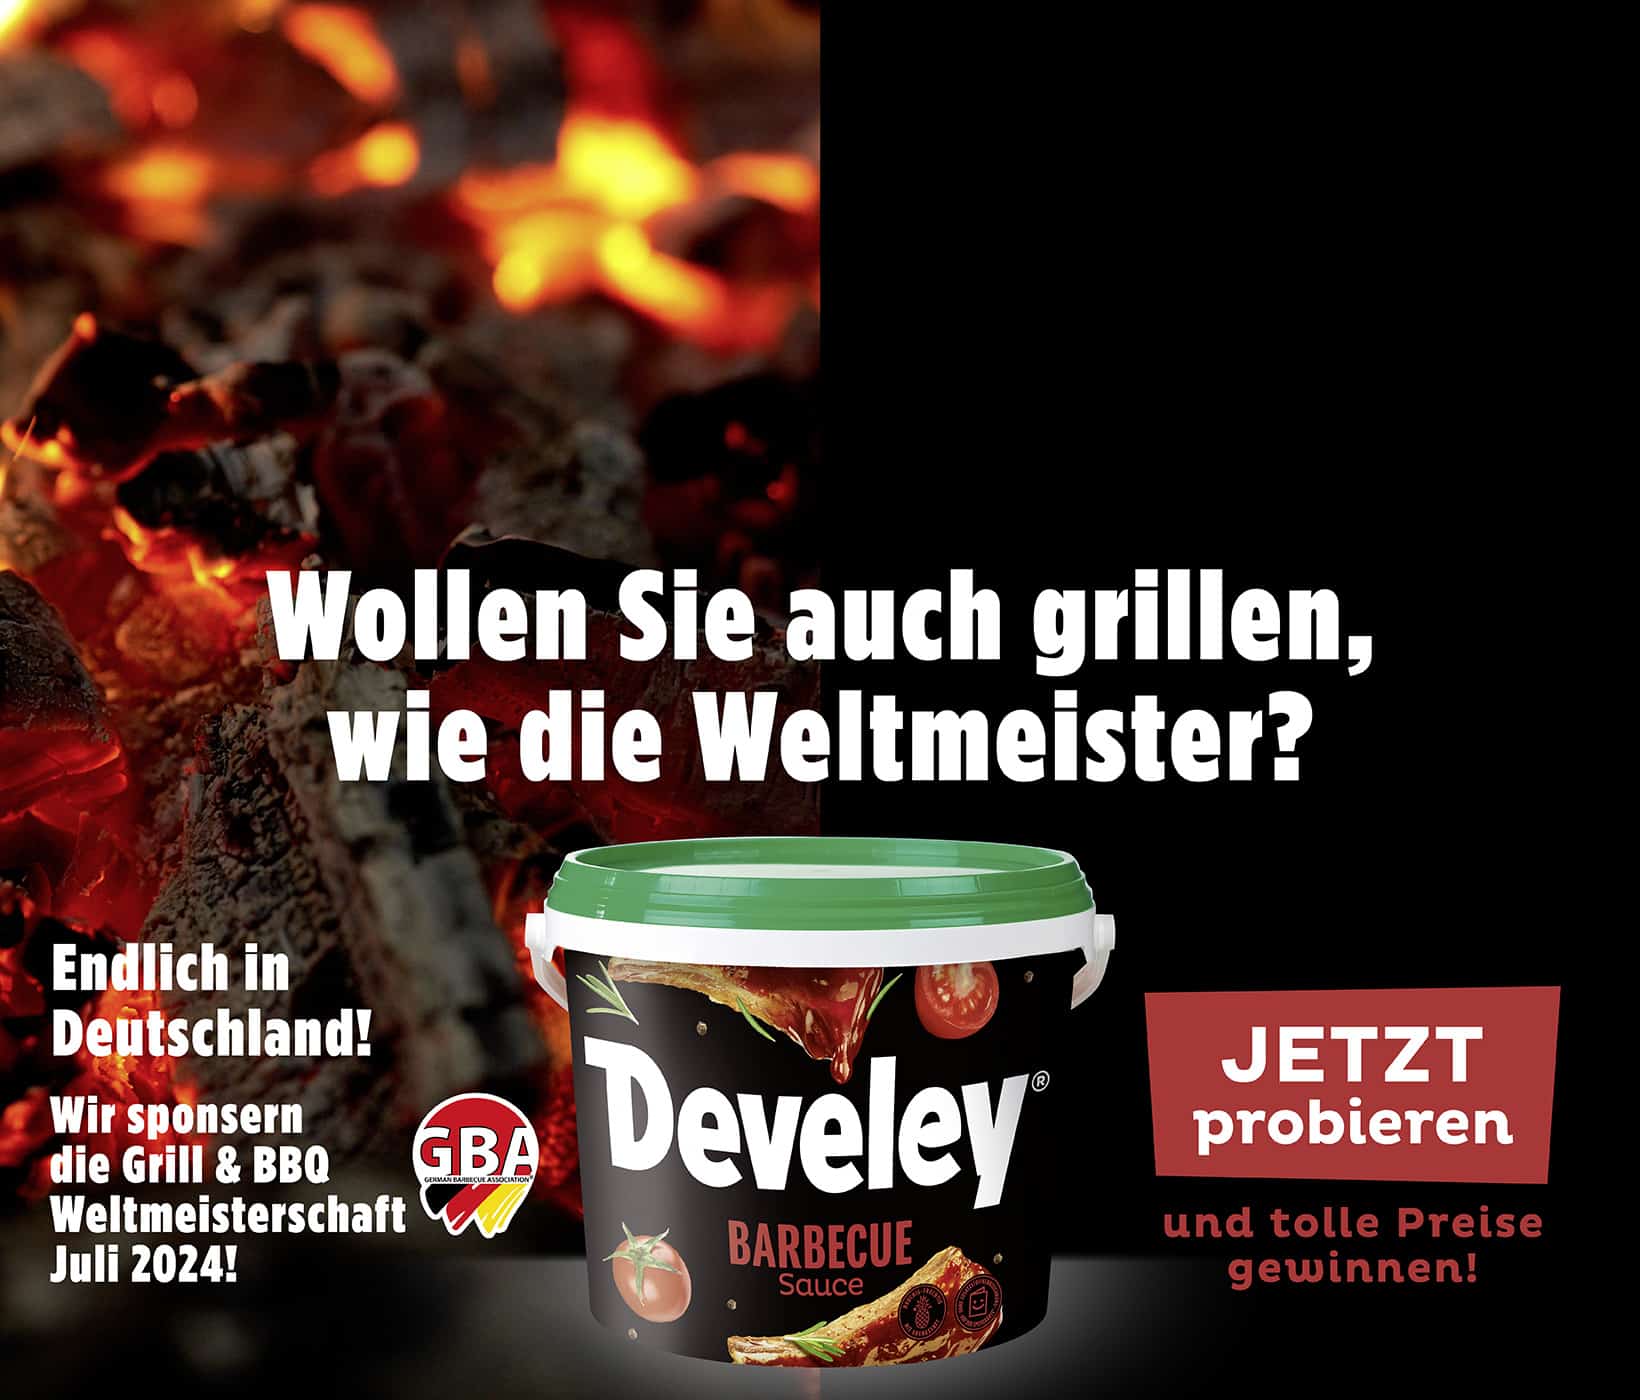 Develey Barbecue Sauce Grill Weltmeister Webbanner 1640 × 1400 LO4